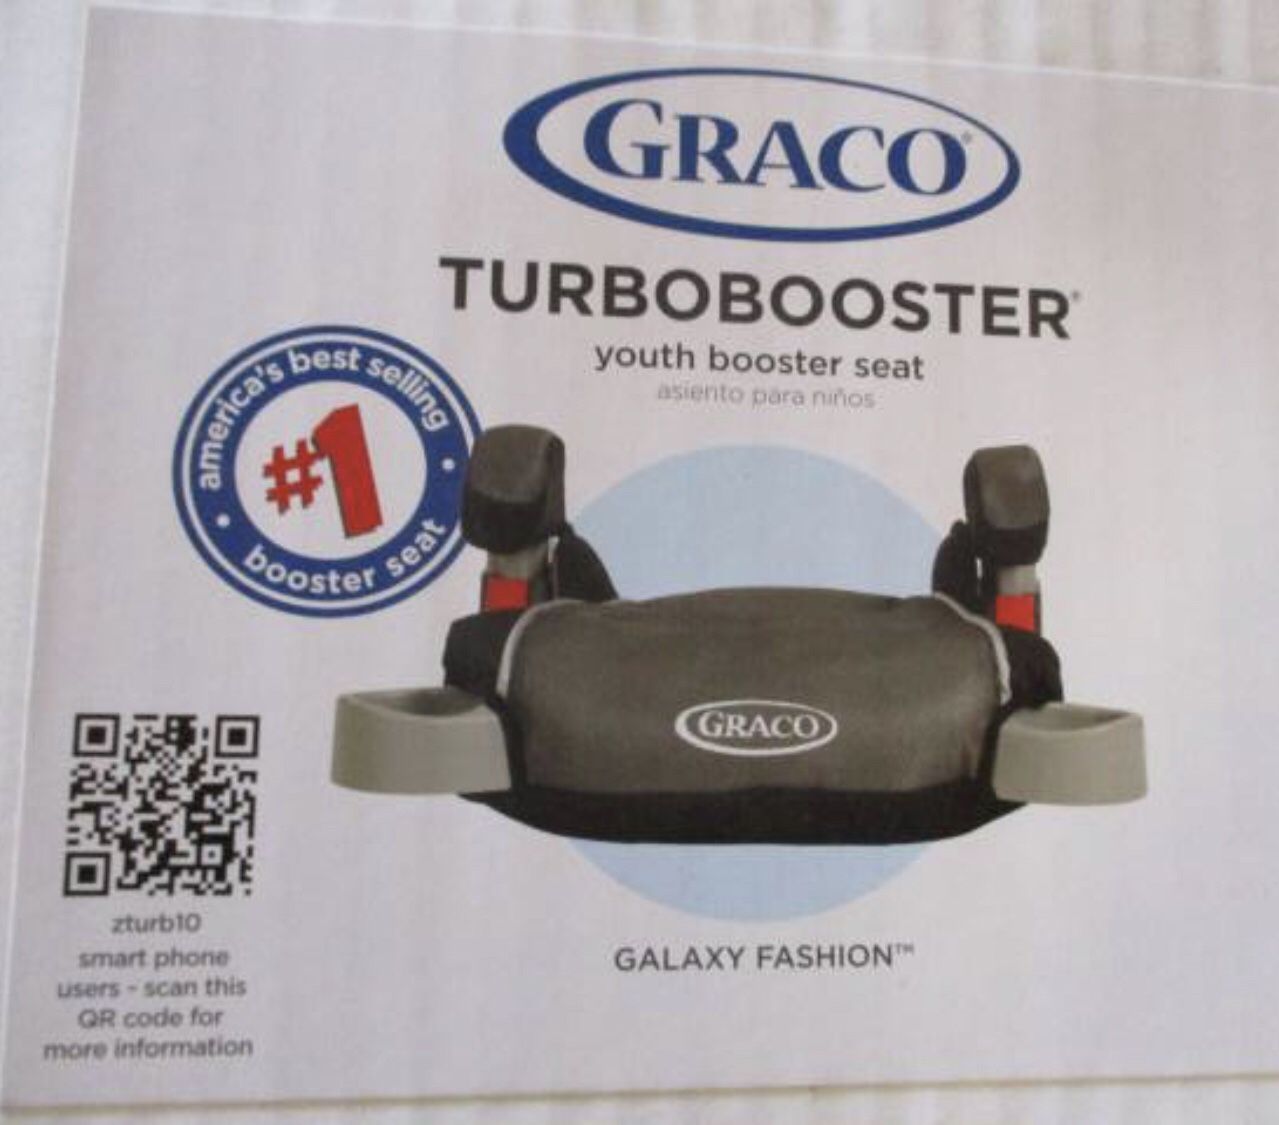 Graco Turbobooster Youth Booster Seat